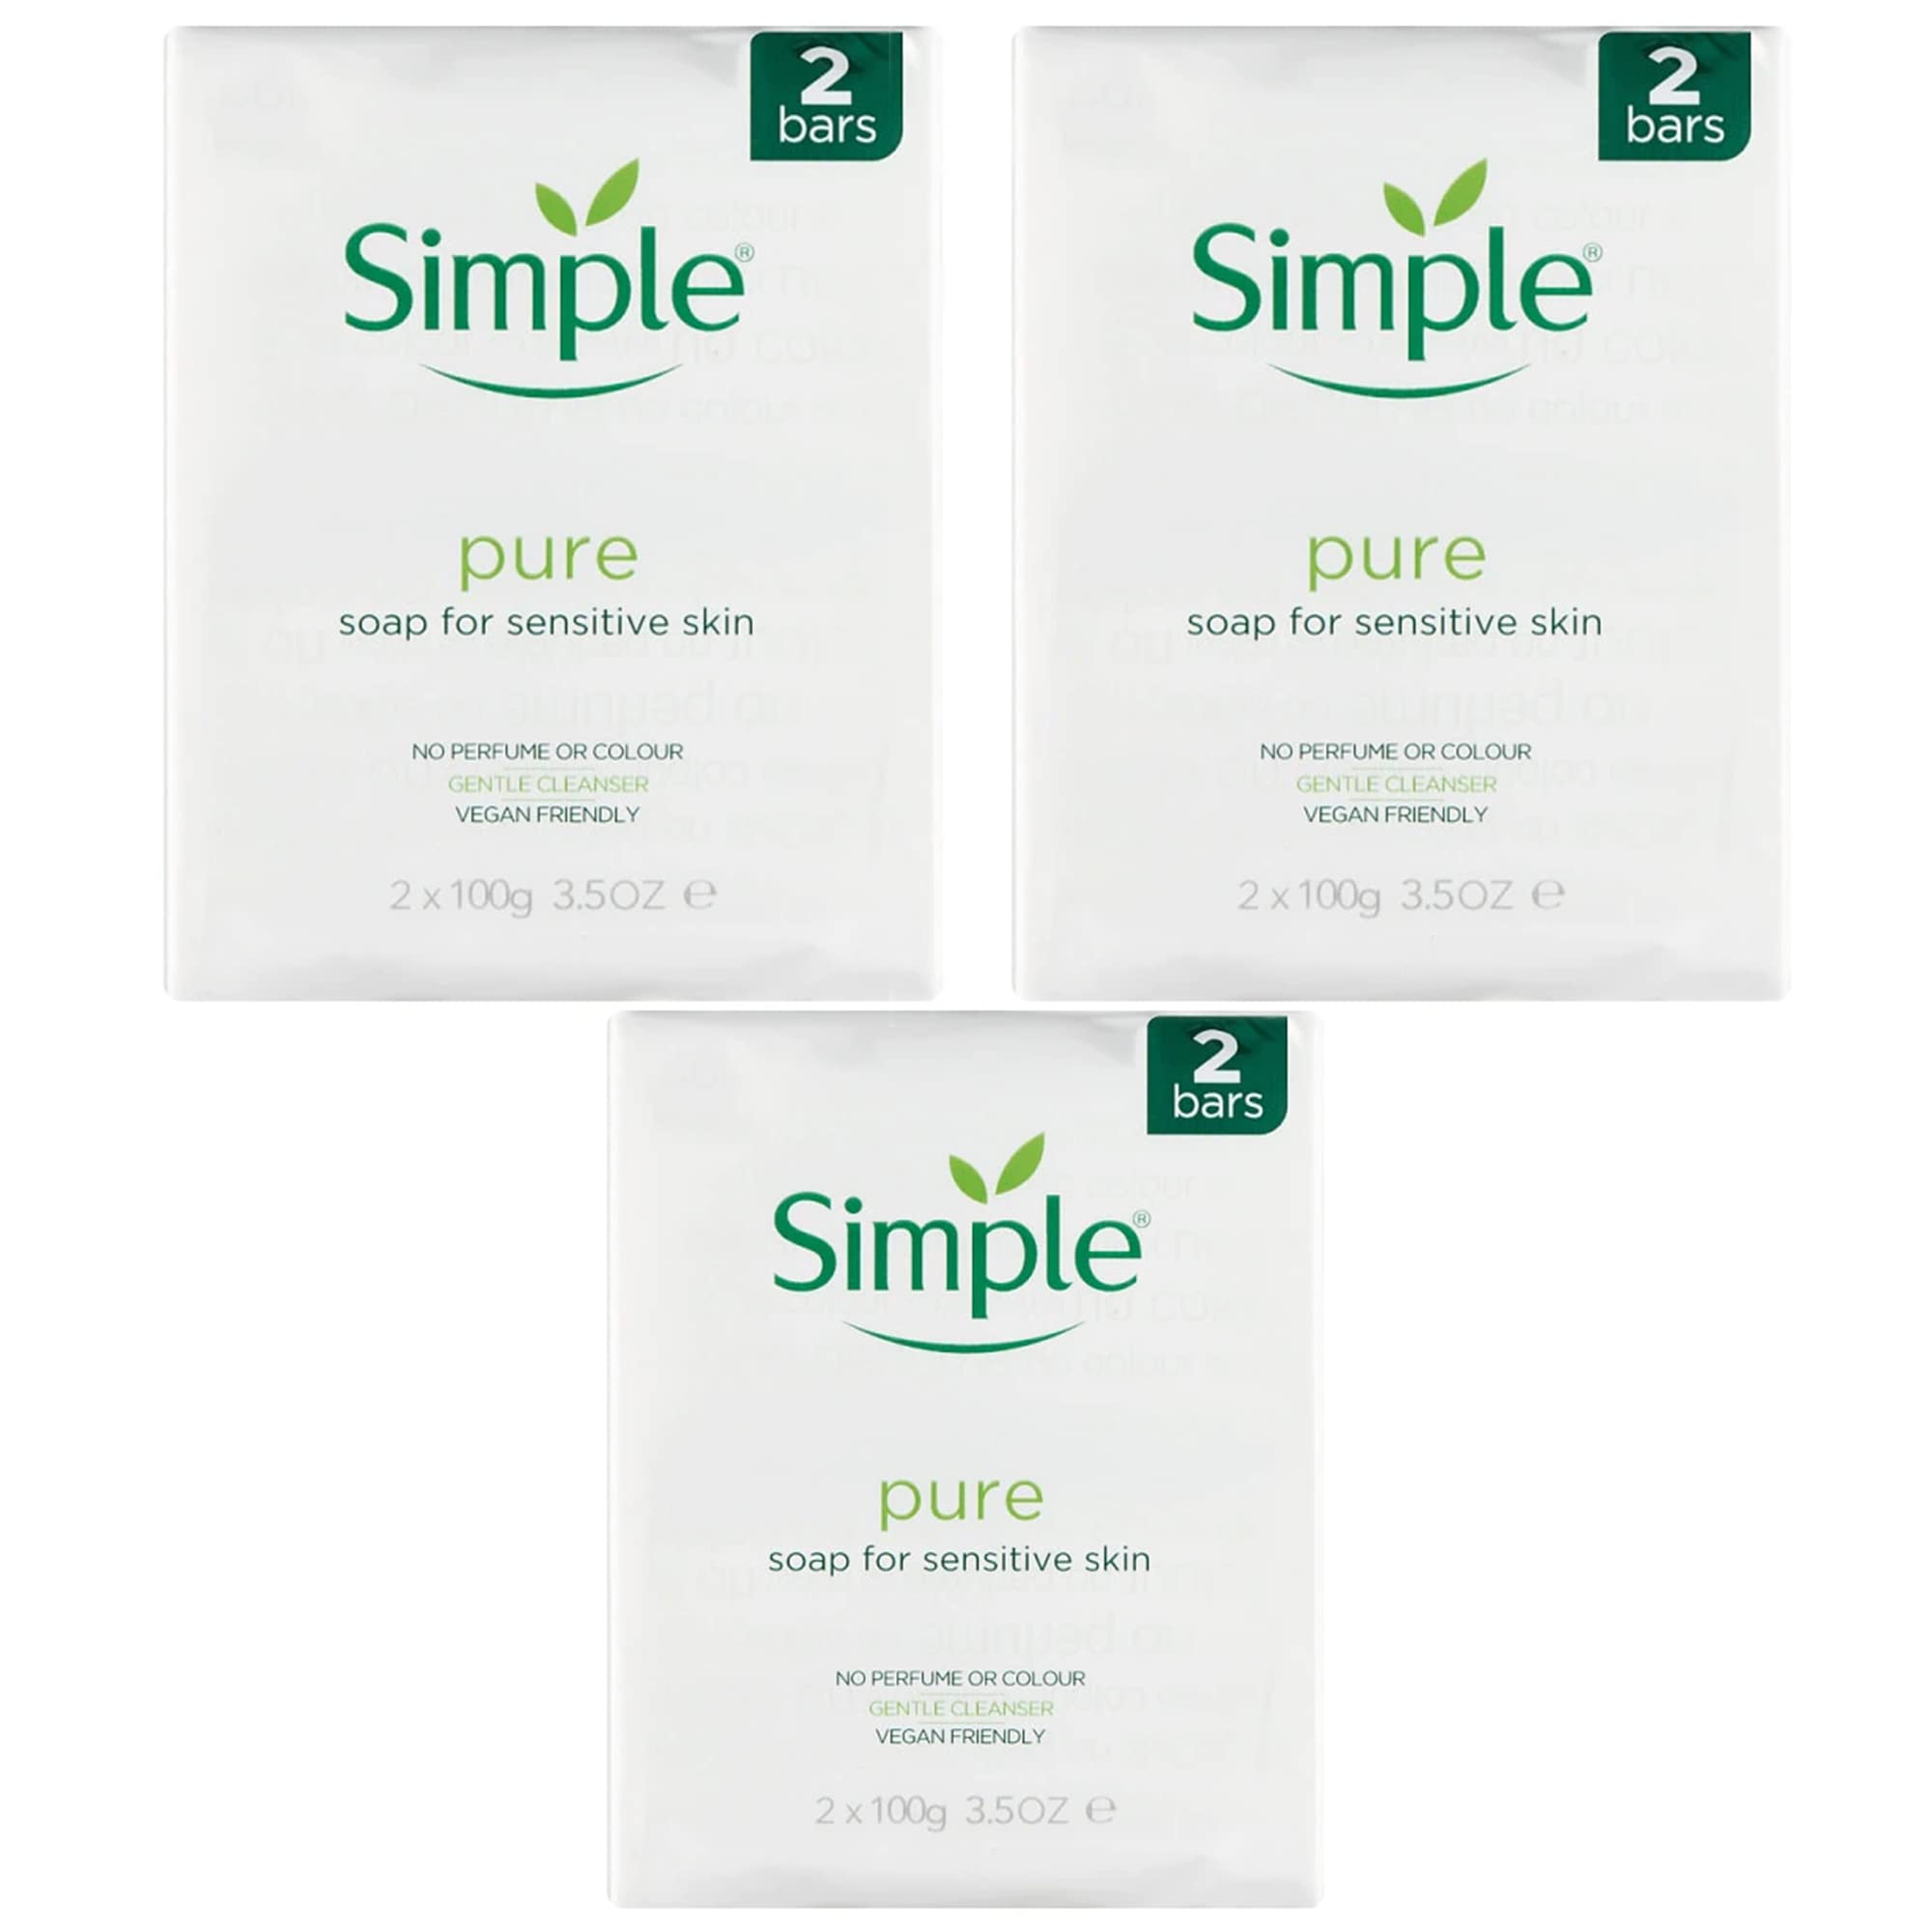 PBW INTERNATIONAL Simple Pure Soap Bars For Sensitive Skin Pack of 6 (6 x 100g) - 3 x Twin Packs